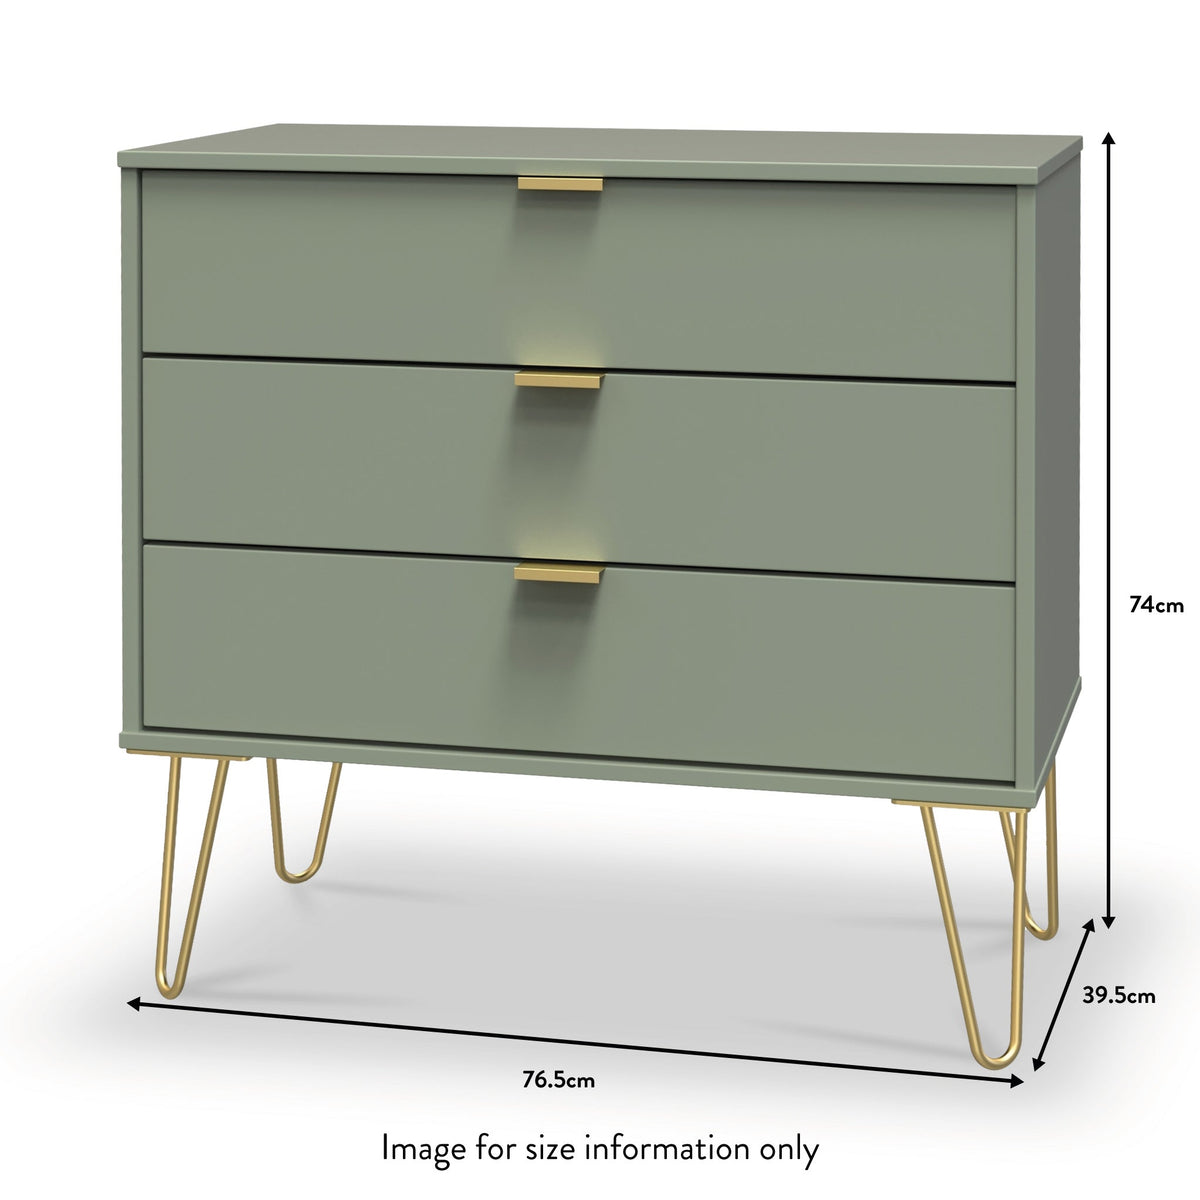 Moreno Olive Green 3 Drawer Chest with gold hairpin legs dimensions guide